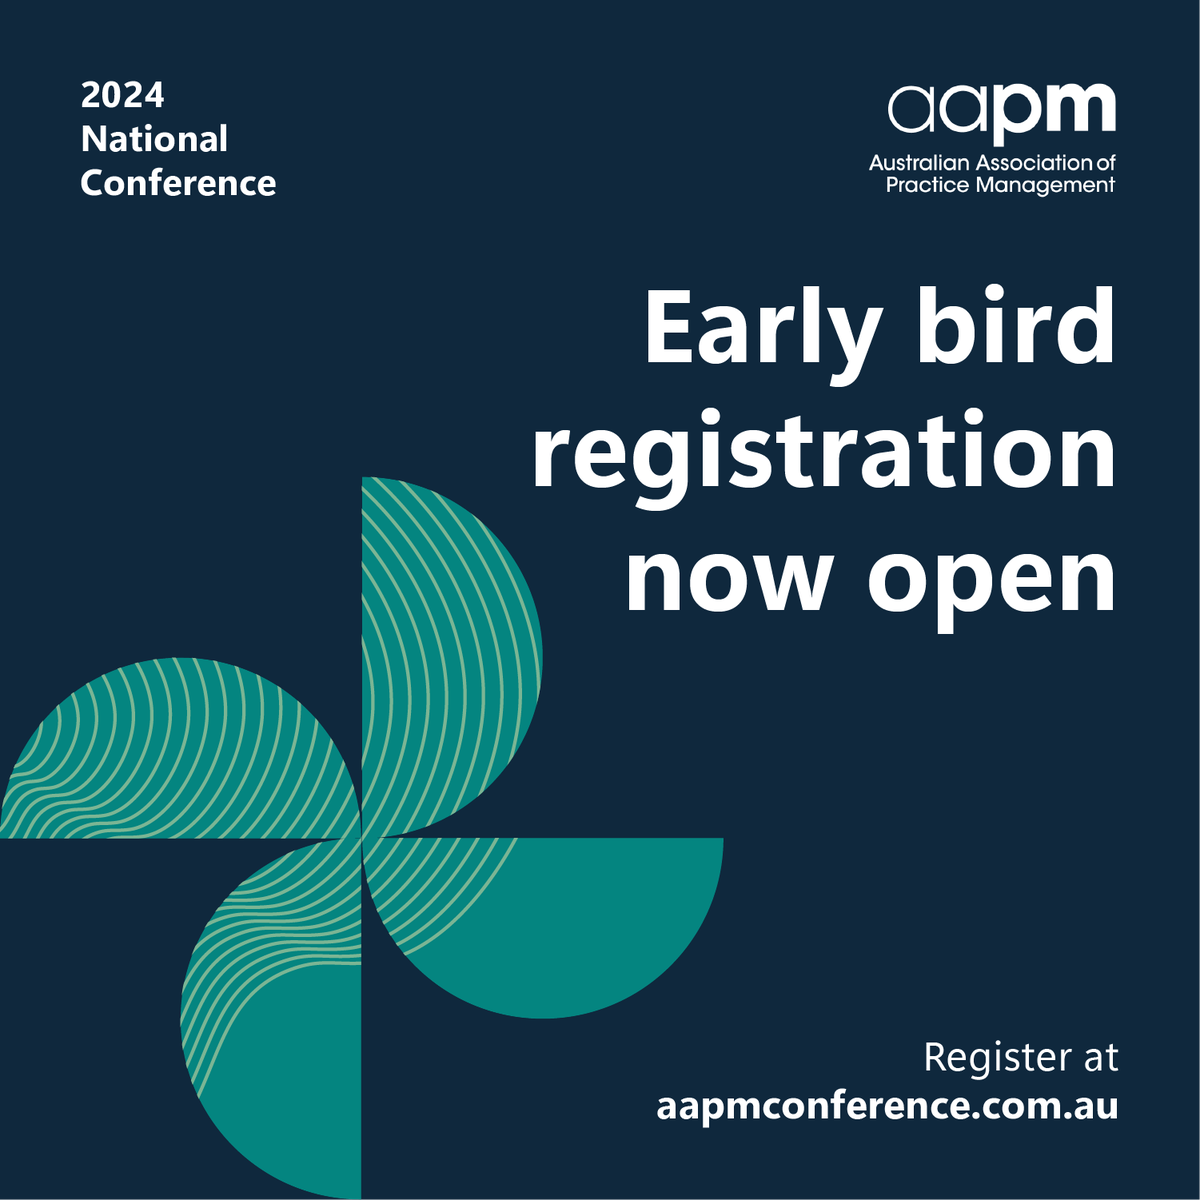 Get ready for the 2024 AAPM National Conference in Darwin! Registration is open now so that you can lock in the best deals on flights and accommodation. ✈️ Secure your Early Bird registration to learn, connect, and explore the stunning Top End.

aapmconference.com.au